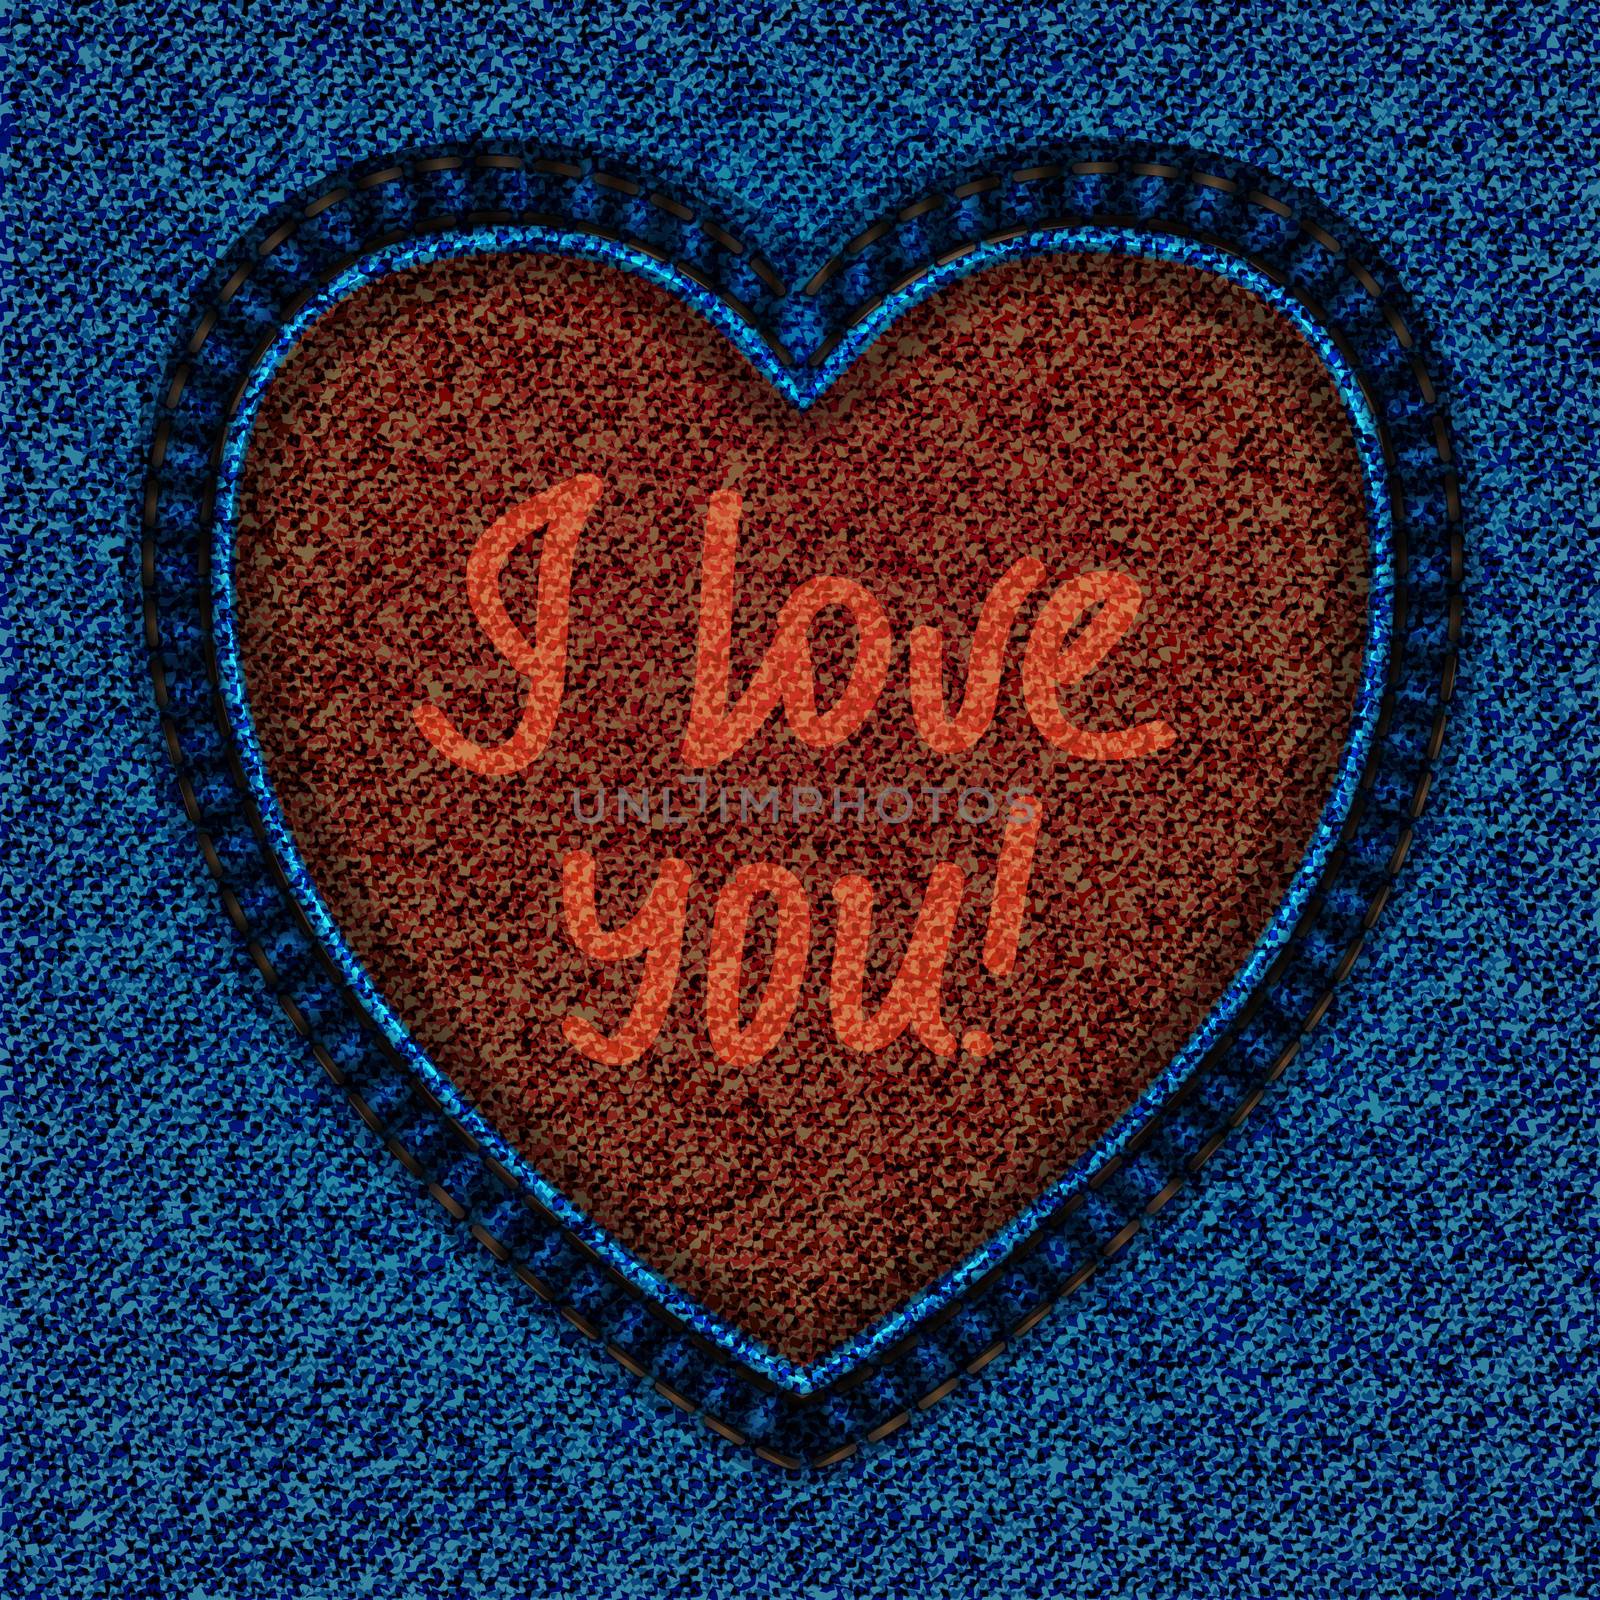 embroidery on the denim fabric in the shape of heart